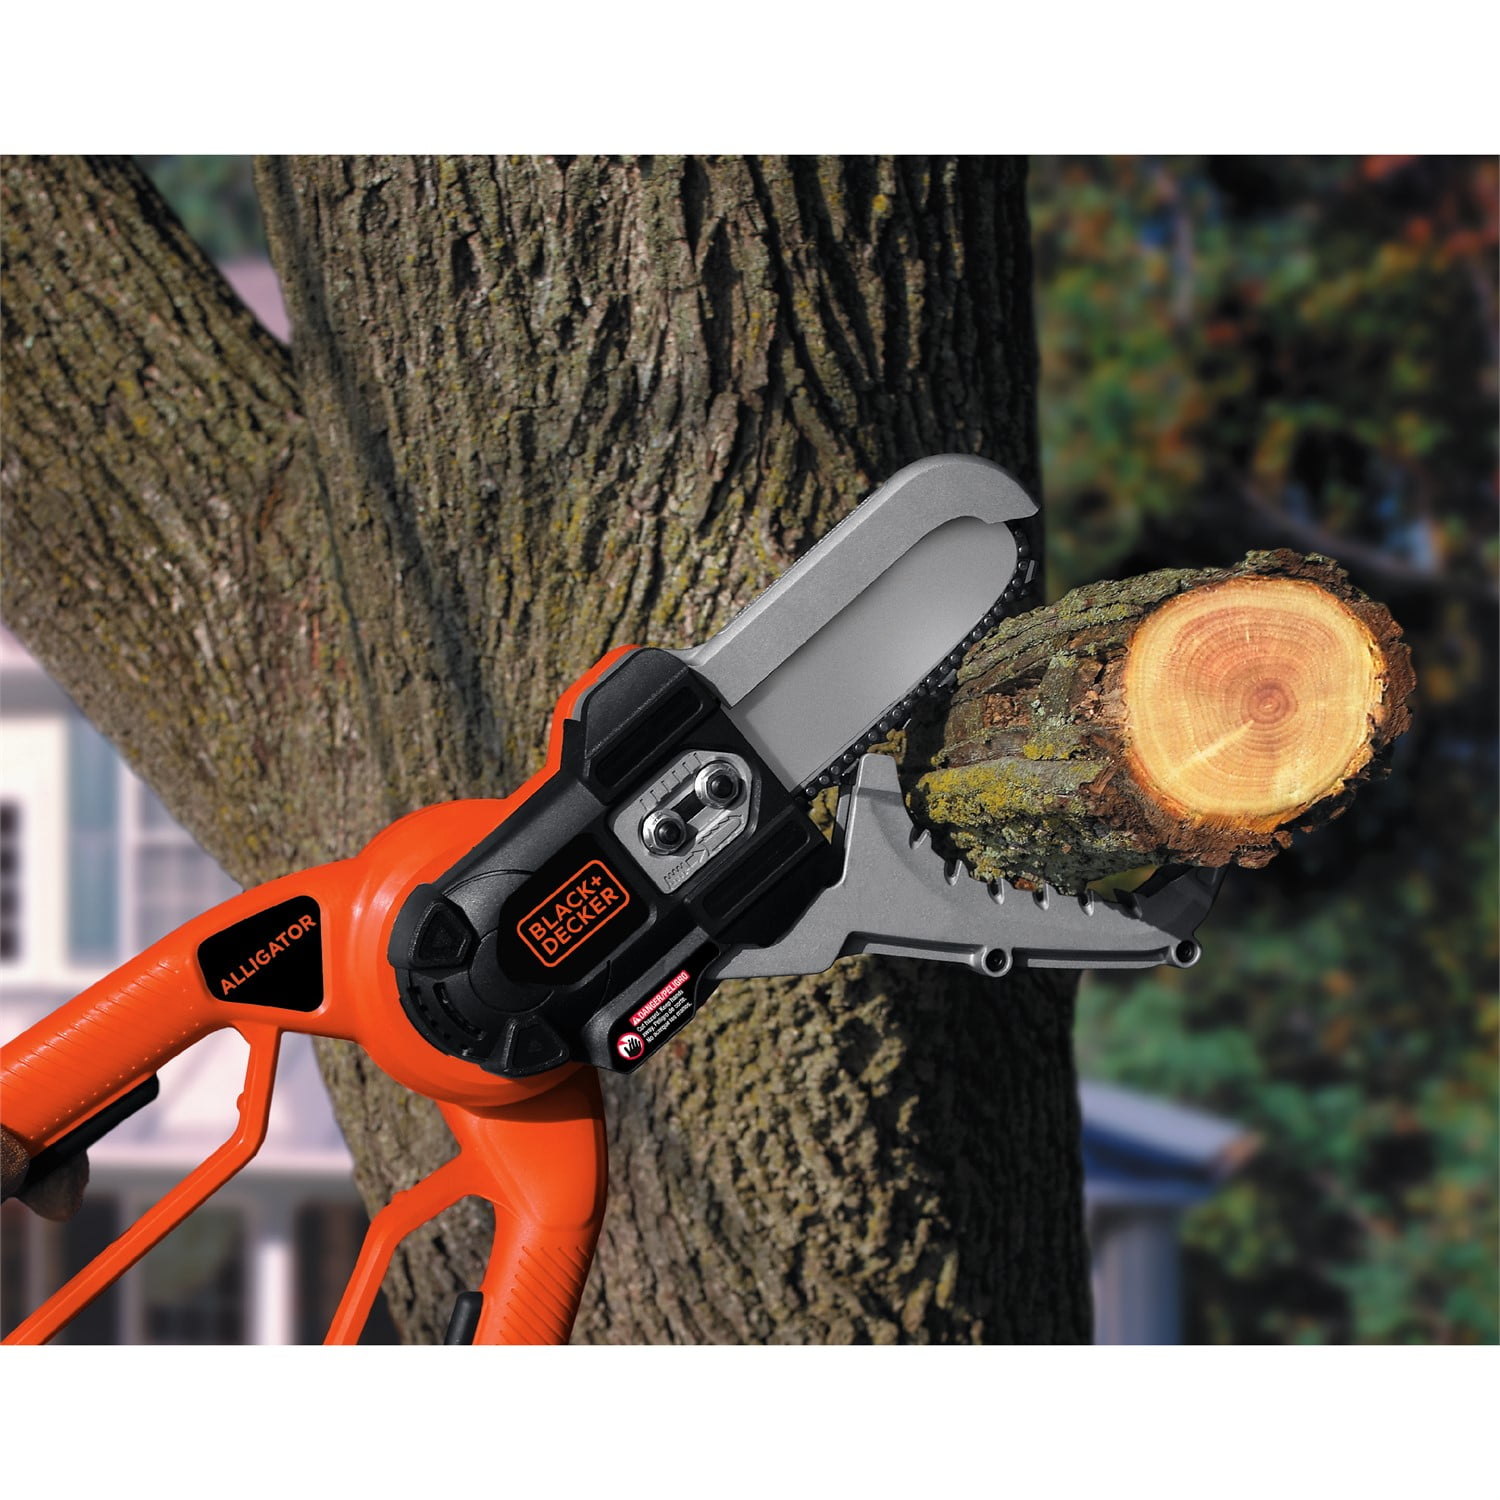 Black & Decker 20V Cordless Alligator Lopper Review  Perfect For Tree  Trimming & Woodcutting! 